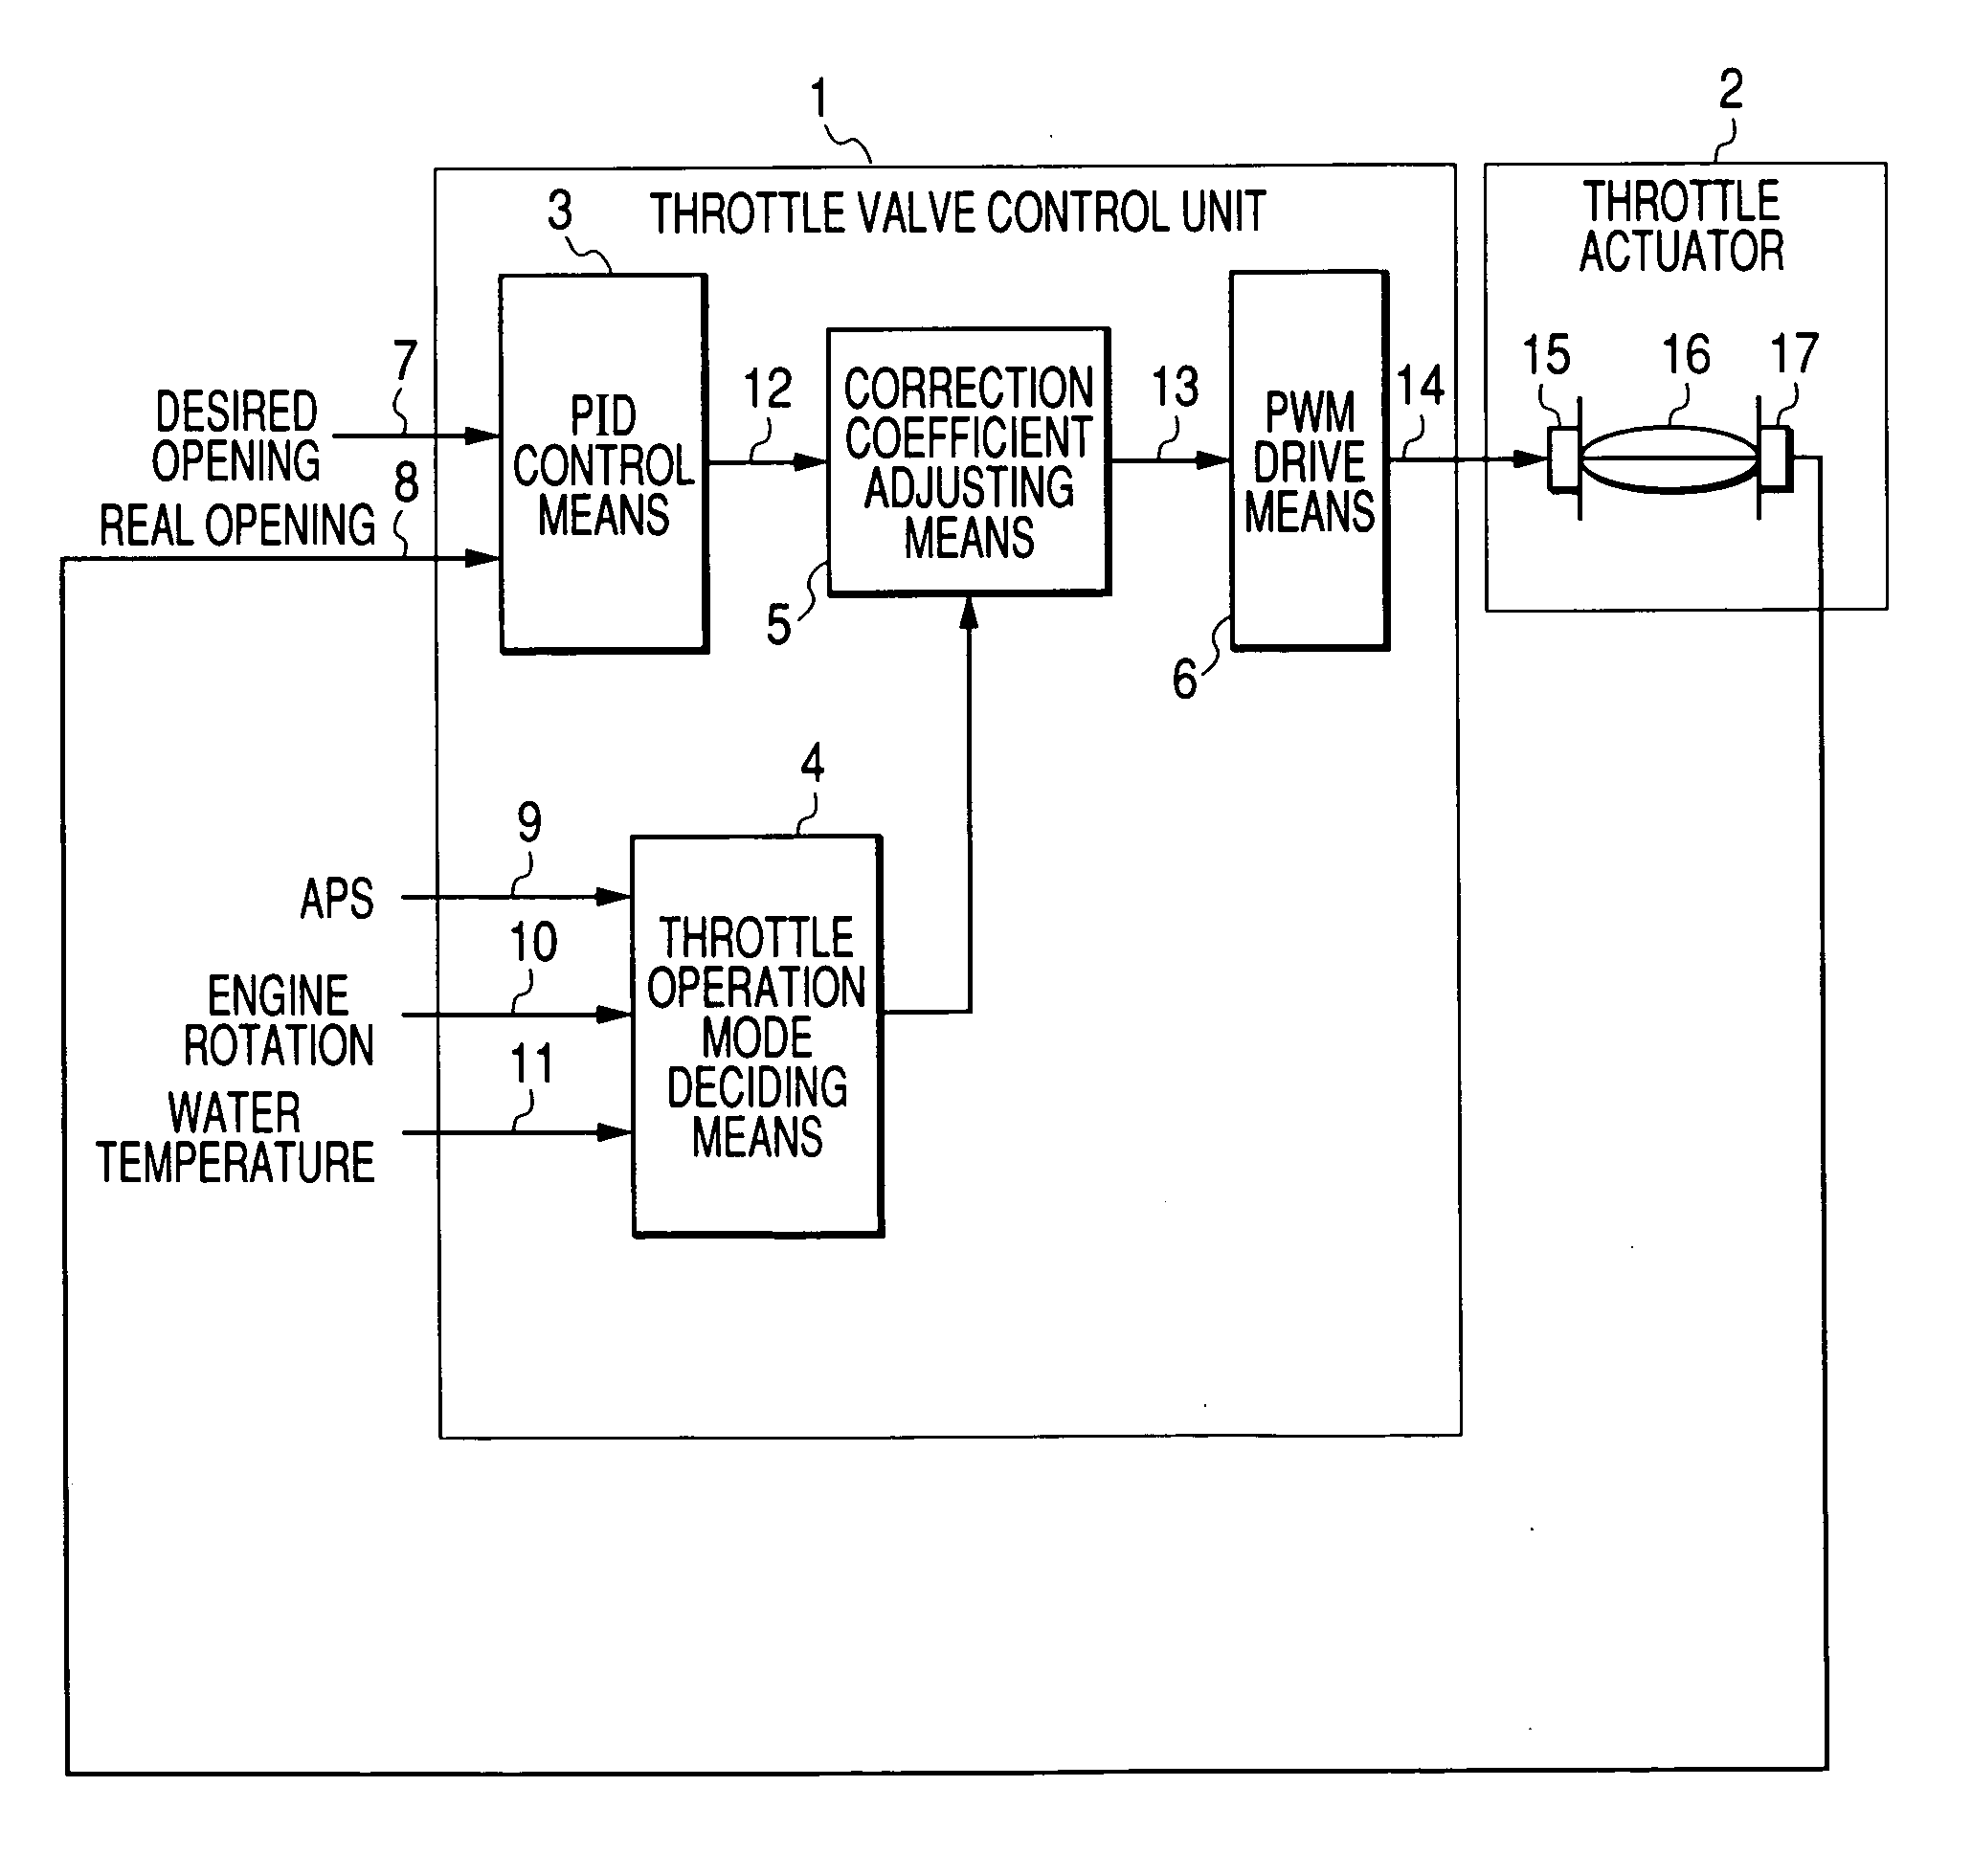 Throttle control device for internal combustion engines